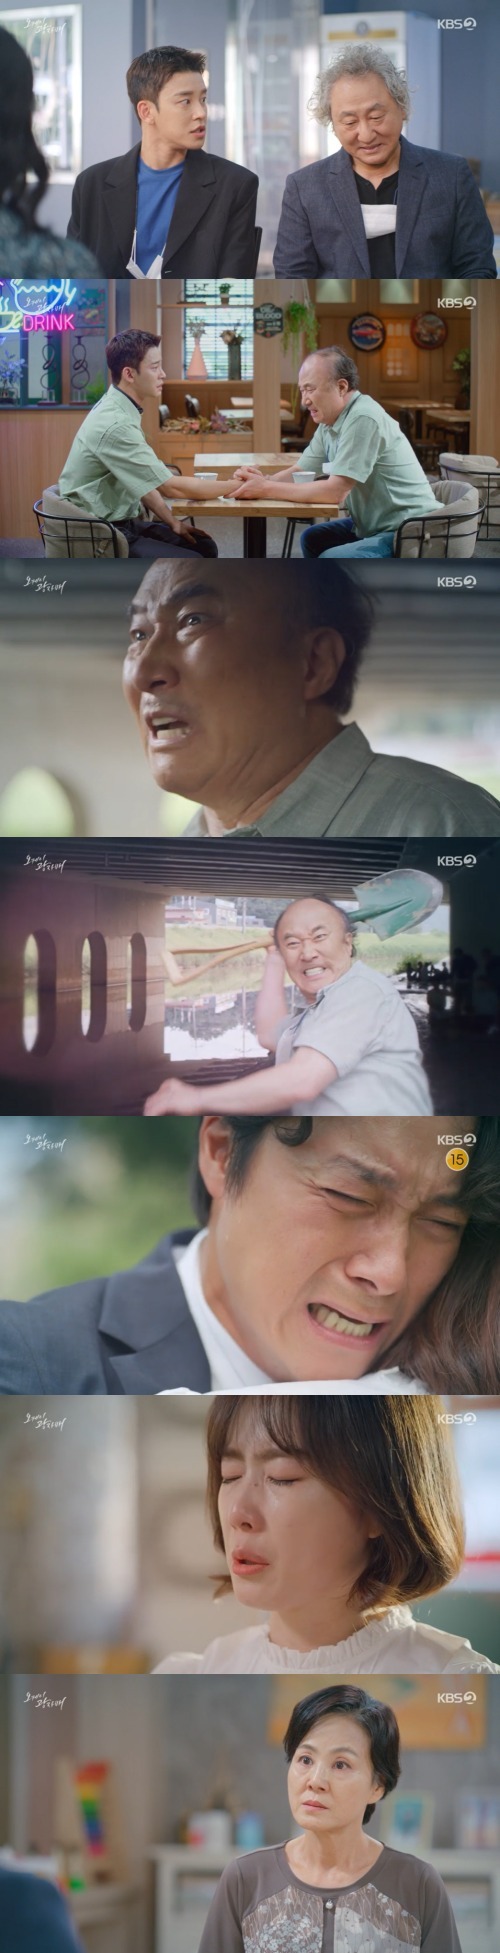 Seoul = = The birth secret of OK Photon Ko Won-hee has been revealed.In the KBS 2TV weekend drama OK Photo Sister (playplay by Moon Young-nam/directed Lee Jin-seo), which was broadcast on the 29th, Lee Cheol-soo visited Nachbum (played by Jung Seung-ho).On this day, Heo Gi-jin (Seol Jung-hwan) asked Lee Kwang-tae (Ko Won-hee) not to answer any phone calls he didnt know.Lee Kwang-tae said, I have caught a voice phishing fraudster. He grabbed Lee Kwang-taes hand and said, Do not trust anyone in the world, but live with me.Nach appeared in front of Lee Kwang-tae, pretending to be a coincidence. Heo Gi-jin took Lee Kwang-tae outside.Lee Kwang-tae said, What is going on with Hung Gi-jin? But Hung Gi-jin did not tell me, Do not say hello next time.Hung Gi-jin, who sent Lee Kwang-tae home, resented how Nach could do this if Lee Kwang-taes biological father was right.Nachbum said, I do not have any affection for Lee Kwang-tae, he said. Is not the grace that made me born in this world to pay back?Heo Ki-jin visited Lee Cheol-soo and informed him that Lee Kwang-taes father appeared. Lee Chul-soo said, Lets move on to what we know only.When he realized that Nachbeom had asked Hung Gi-jin for money for Lee Kwang-tae, he felt sorry for Hung Gi-jin, who cried, It was so hard. I was afraid of the shock.Im sorry, I should have solved it before, Lee said. When he returned home, he went to Nach with a shovel.Lee Chul-soo, who found Nachbeom, was shocked. Lee Kwang-tae was the one who gave birth to the five-year-old.Bae Bang-ho (Choi Dae-cheol) went to Restaurant in the suburbs, worried about the health of Lee gang-nam (Hong Eun-hee).Lee gwang-nam couldnt hide his uneasiness when he saw Restaurant.That Restaurant was because Lee gang-nam went with Hwangcheon-gil (Seo Do-jin).Restaurant was pictured with Lee gwang-nam and Hwangcheon-gil. The bowels were seen.The unwitting Restaurant employee even smacked the lee gang-nam and asked for his best regards on the Hwangcheon road.Bae was troubled by recalling the texts of the lee gwang-nam and Hwangcheon-gil, the words of the Restorant employee, the pictures of lee gwang-nam and Hwangcheon-gil.I was also out of town, saying I was going to be late for Lee gwang-nams letter to come in early, and I booked a hospital, but Bae Byun-ho lied that an important meeting had been held.Lee gwang-nam, who lay alone in the room, cried and texted Bae to divide.The bowels were late in the hospital, but the lee gwang-nam was released from the hospital. The bowels regretted the promise they had made with Lee when they reunited with the lee gwang-nam.Lee gwang-nam collapsed on the street in distress. The bowels found and hugged the lee gwang-nam.I also wanted to give you a shot at that time, and I was in a hurry to get jealous and jealous of living well with you, Lee said of the marriage to Hwangcheon-gil.Bae Byun-ho begged her to forgive me.Hes on his way to go to obstetrics and gynecology now, hes going to have a brother with a beetle, Bae Byun-ho, who went home with lee gwang-nam, told Jippungnyeon (Lee Sang-sook).I do not think Im talking about it, he said. I have never recognized her as a daughter-in-law. I can not admit her as my grandson.The bowel and the bowels raised the voice, and the lee gwang-nam dried the bowels. The bowels said, He is my person and the beetle mother.Or I will not see my mother. The year of the festival, I thought that the bowel was playing with the lee gang-nam and left the house to the end.